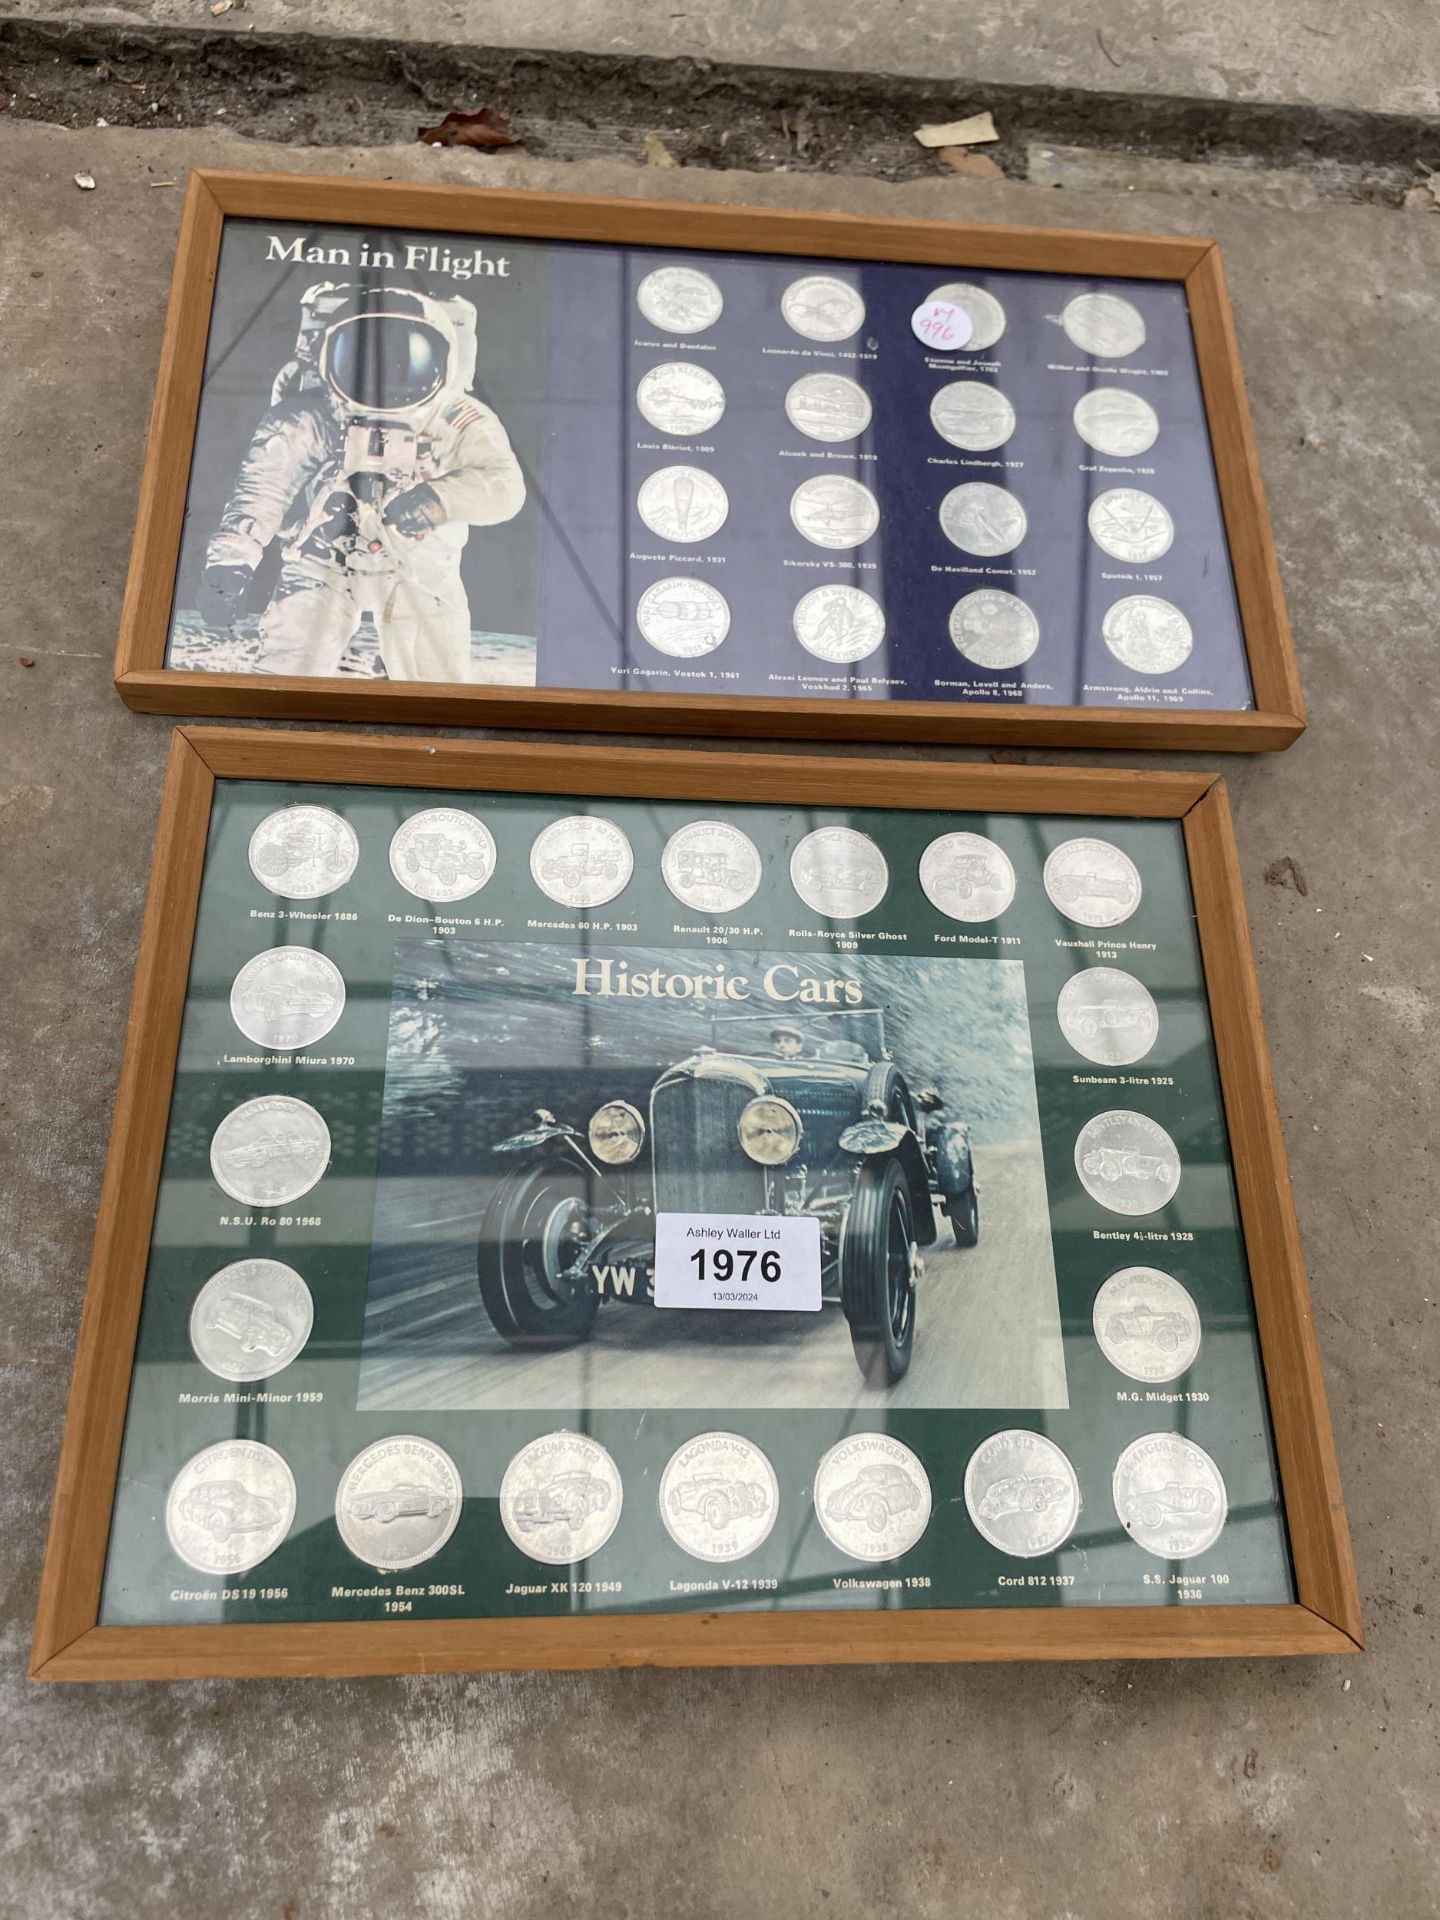 TWO FRAMED TOKEN SETS TO INCLUDE HISTORIC CARS AND MAN IN FLIGHT